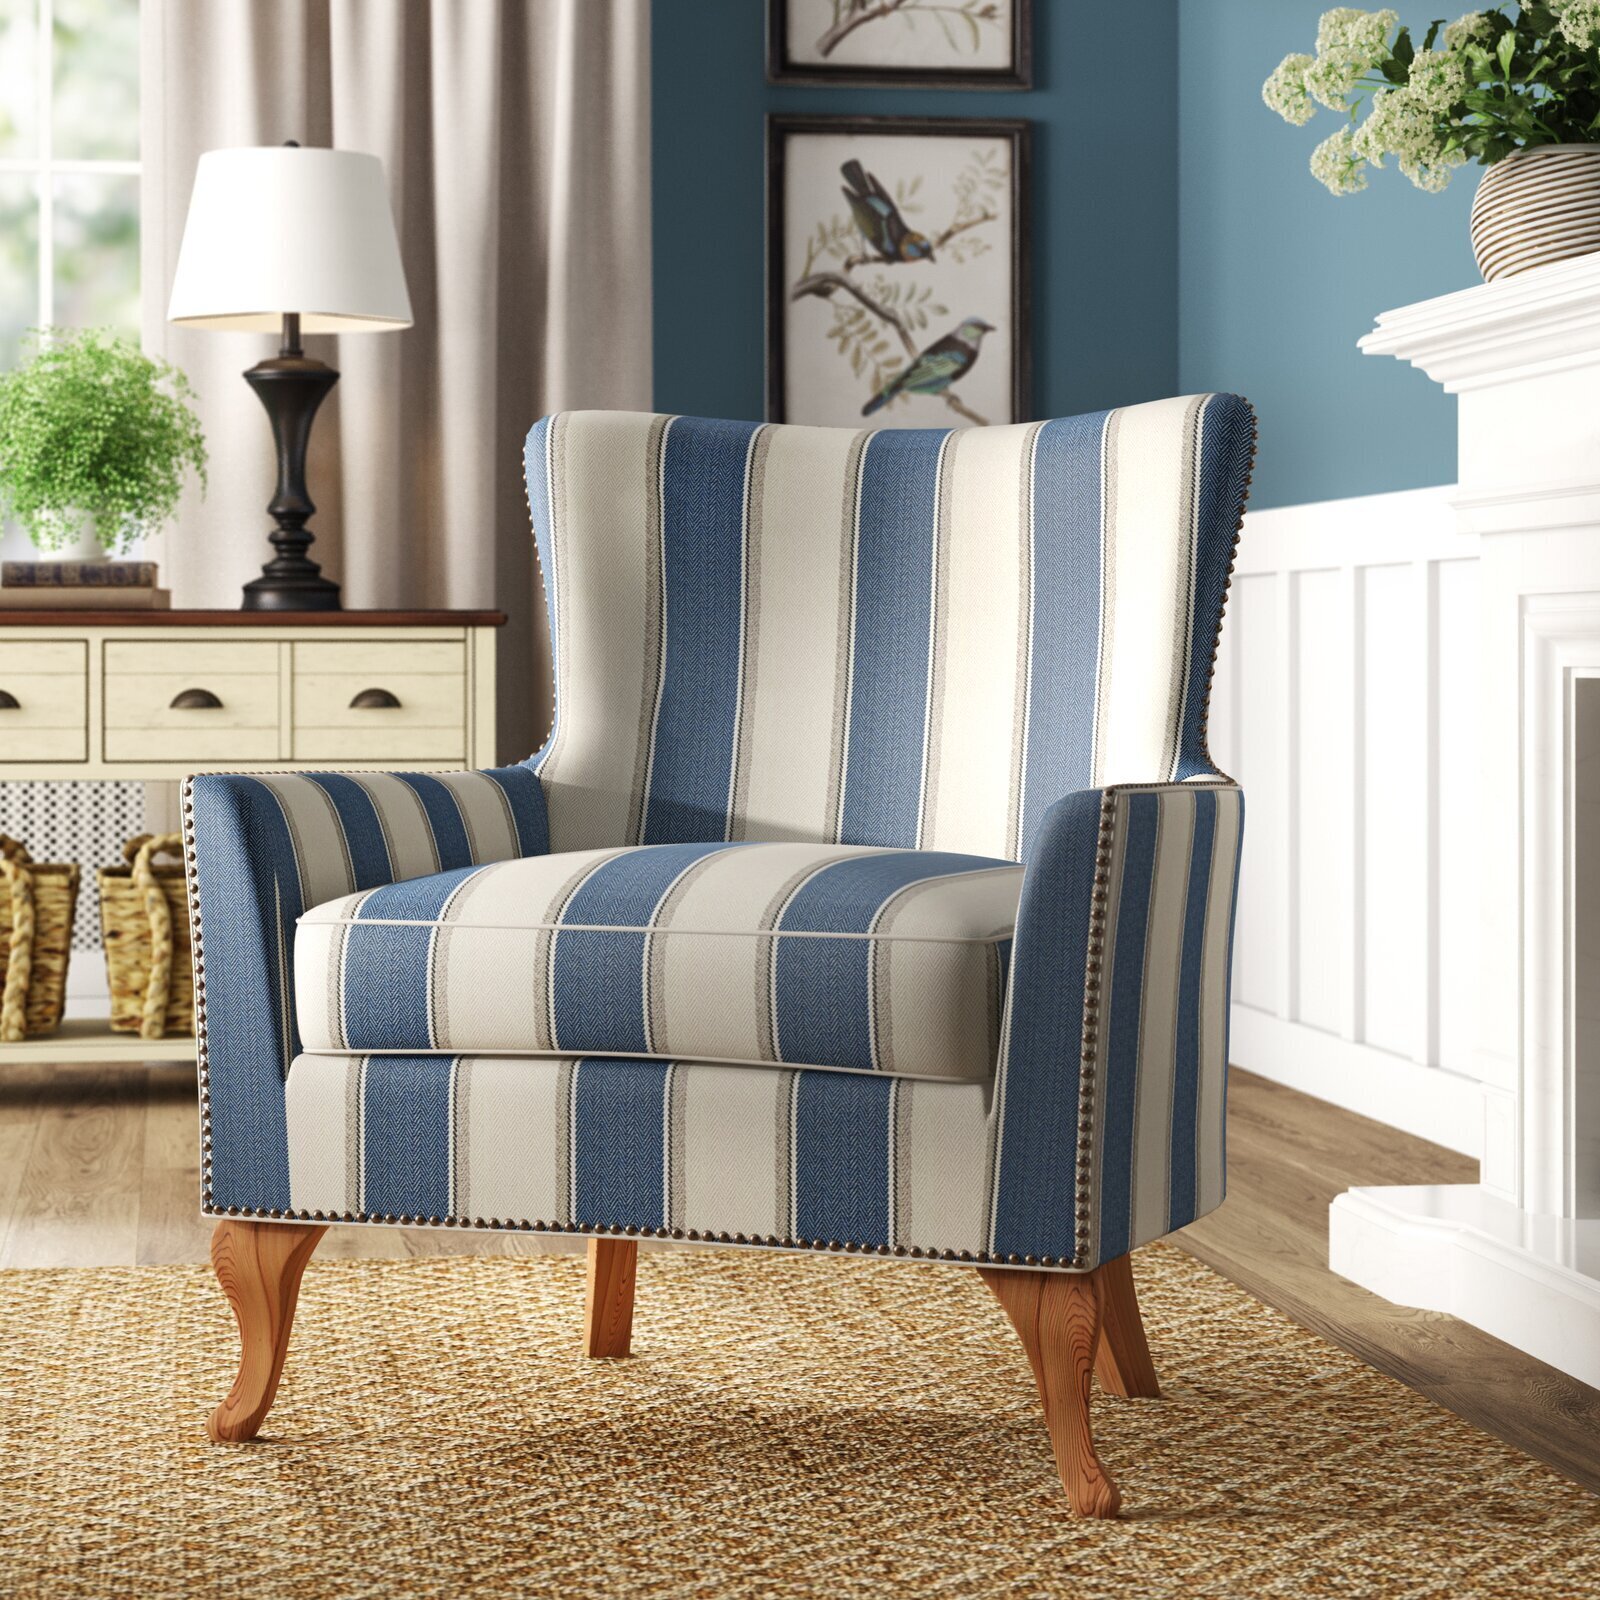 Striped Patterned Armchair